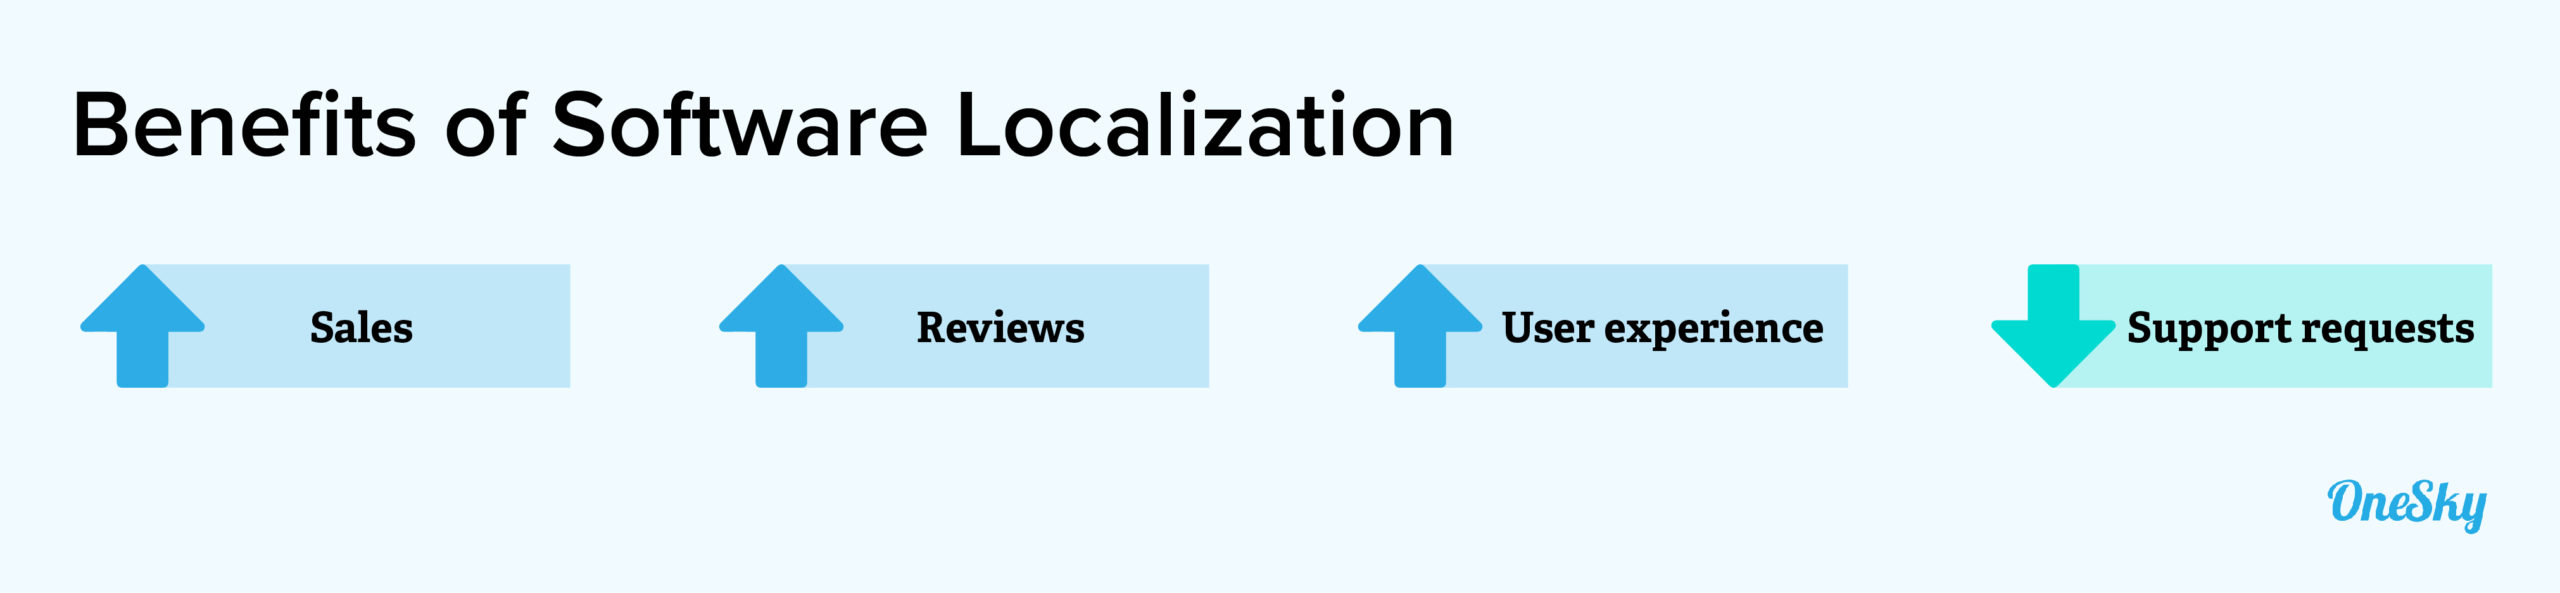 benefits of software localization